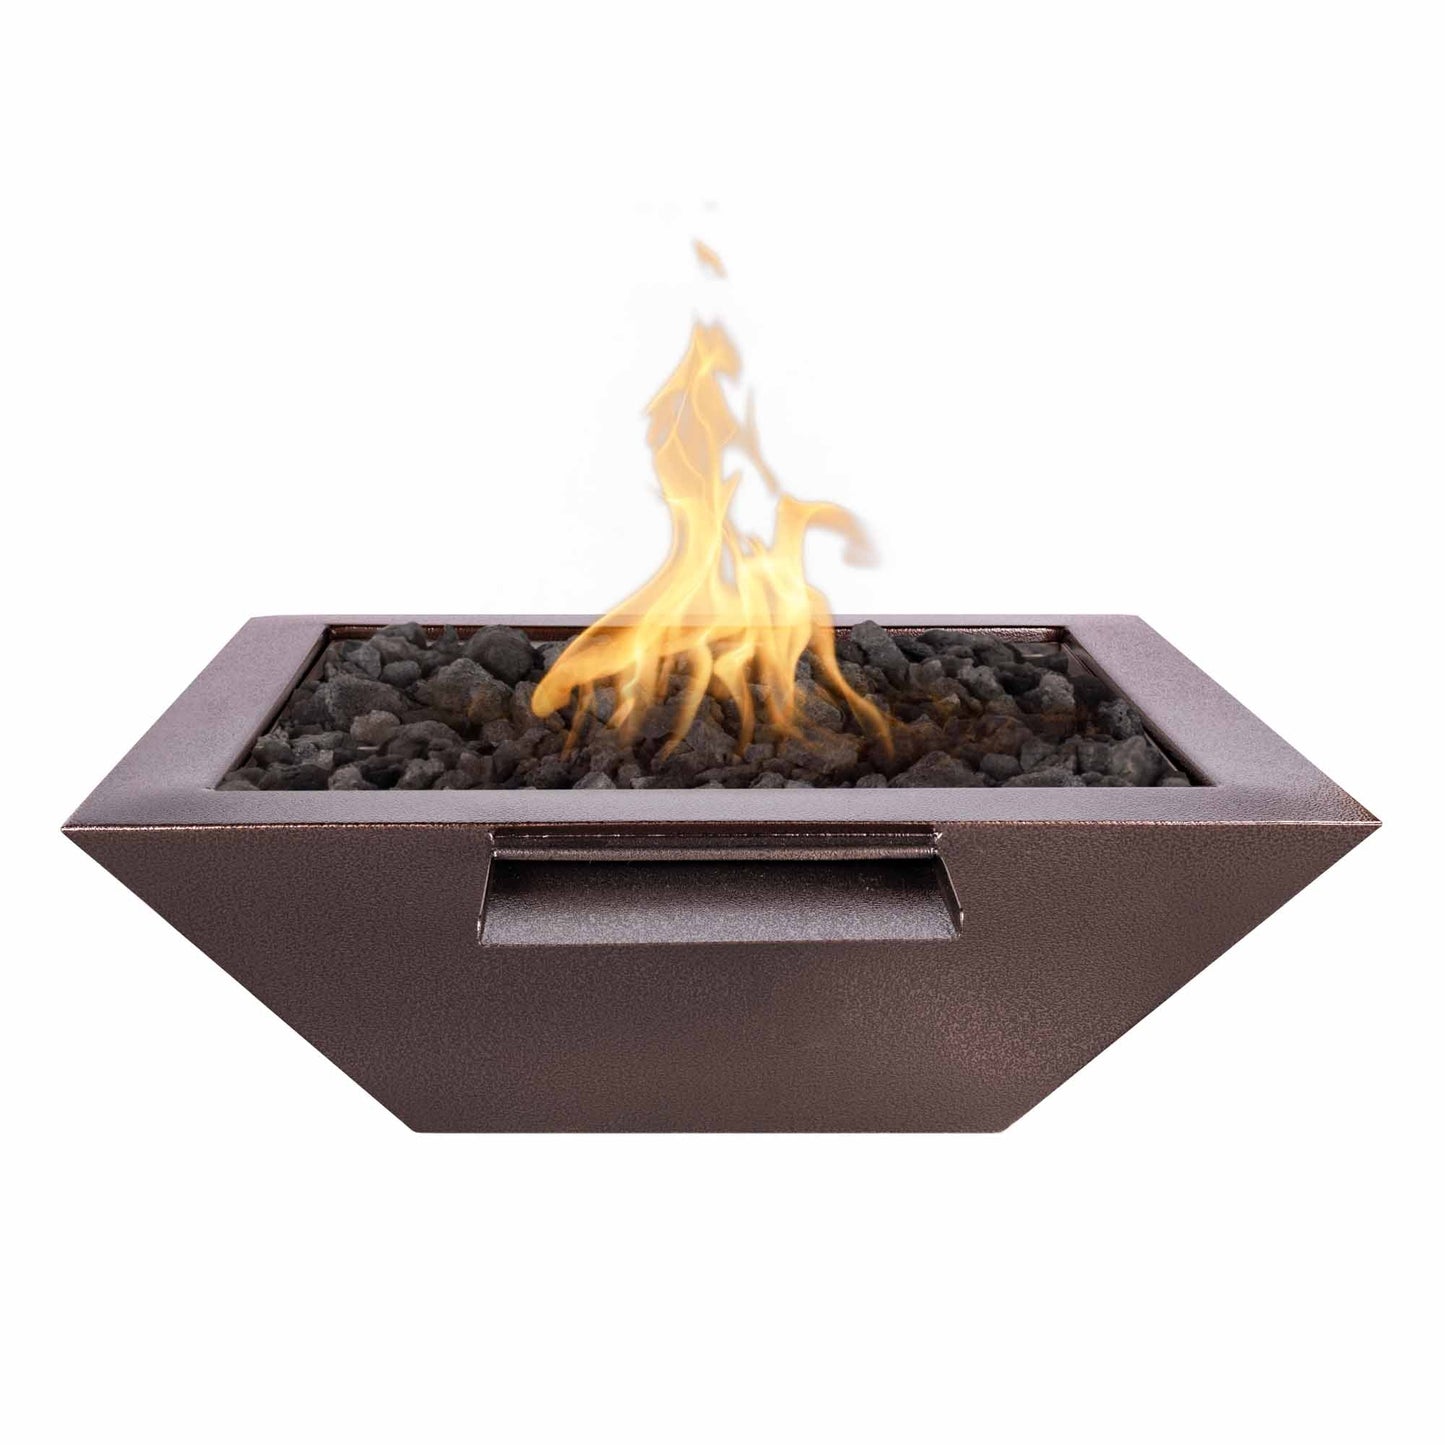 The Outdoor Plus Square Maya 24" Silver Vein Powder Coated Metal Liquid Propane Fire & Water Bowl with Match Lit with Flame Sense Ignition